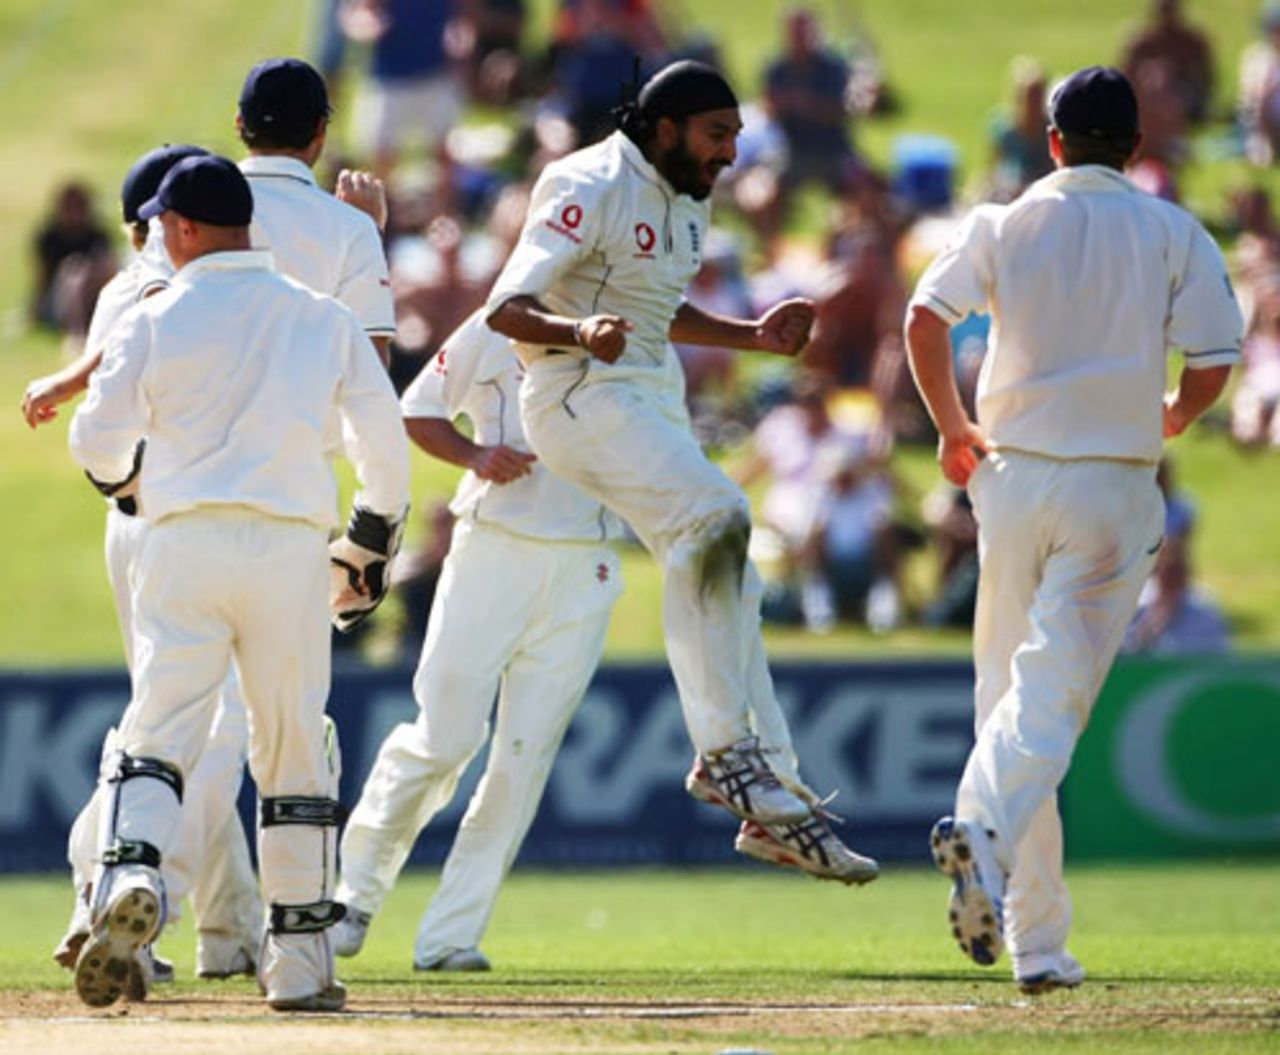 Monty Panesar is cock-a-hoop after getting a wicket, New Zealand v England, 3rd Test, Napier, March 26, 2008